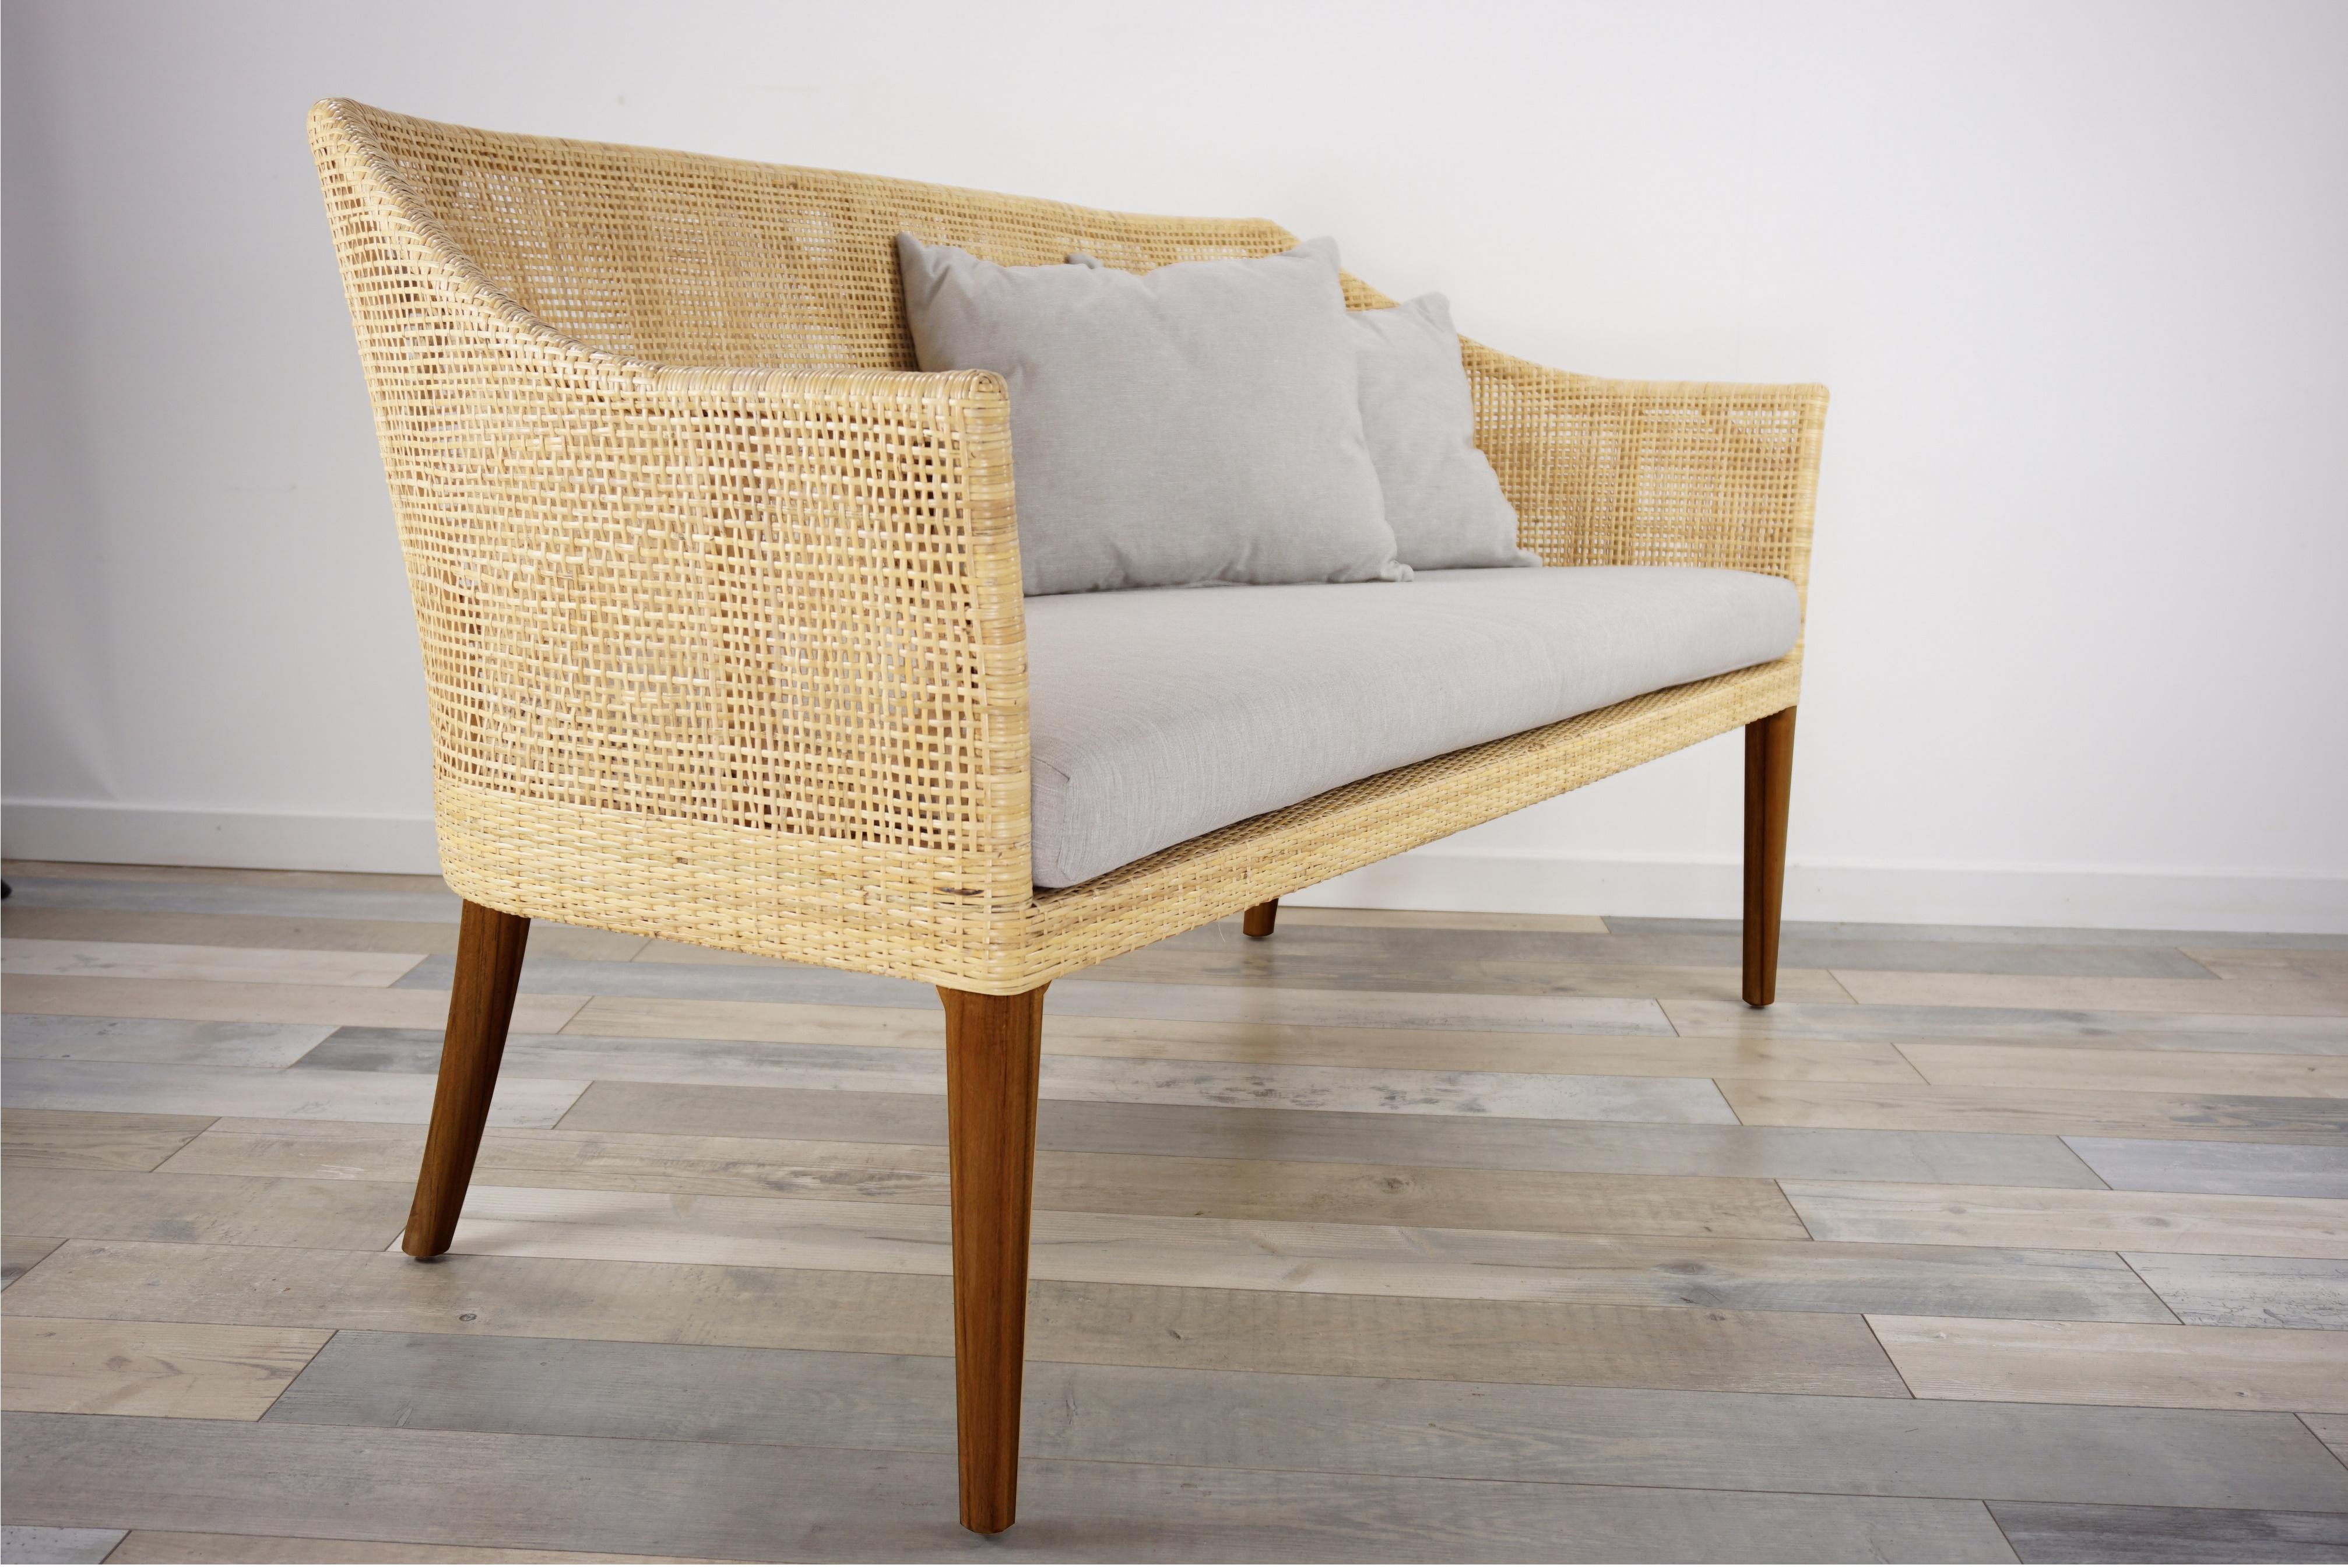 Elegant rattan sofa with wooden structure and handmade braided ratta combining quality, robustness and class. Comfortable and ergonomic, aerial and poetic. The armrests height is 60cm and the seat height with cushion is 42cm ( 35cm without ) All the